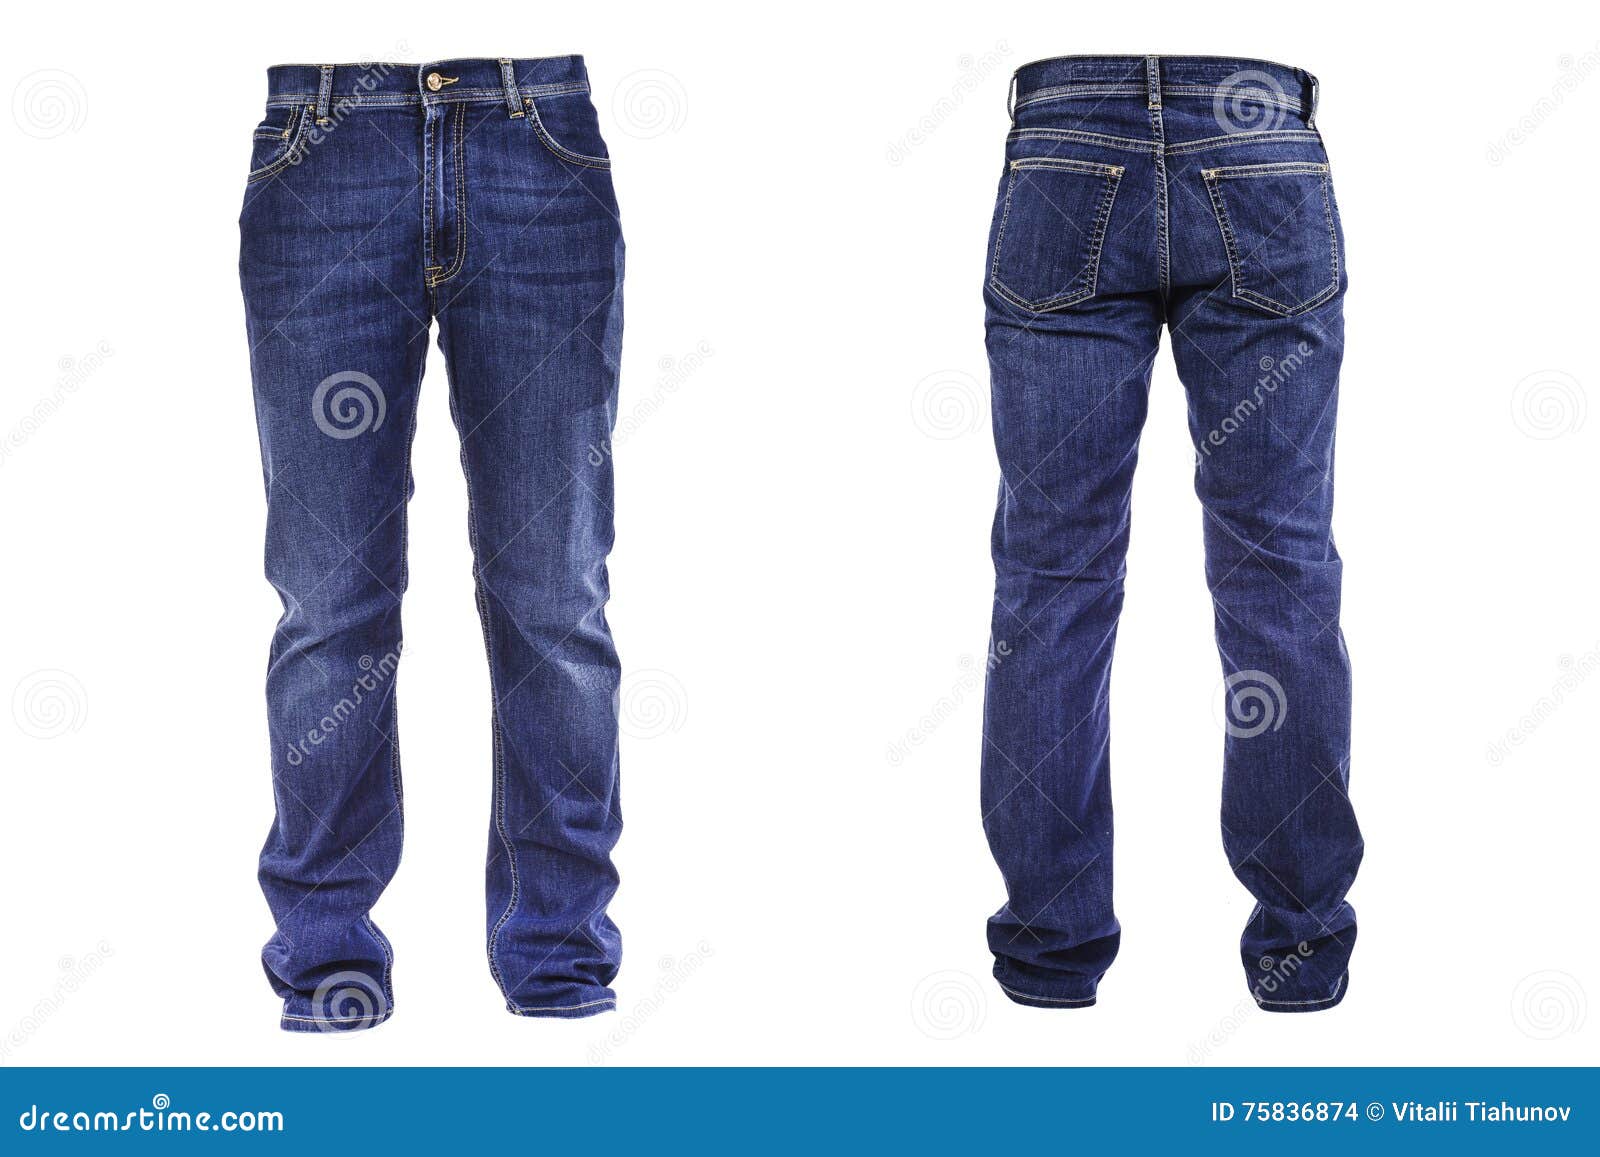 Men S Jeans Isolated on White Stock Photo - Image of slim, legs: 75836874